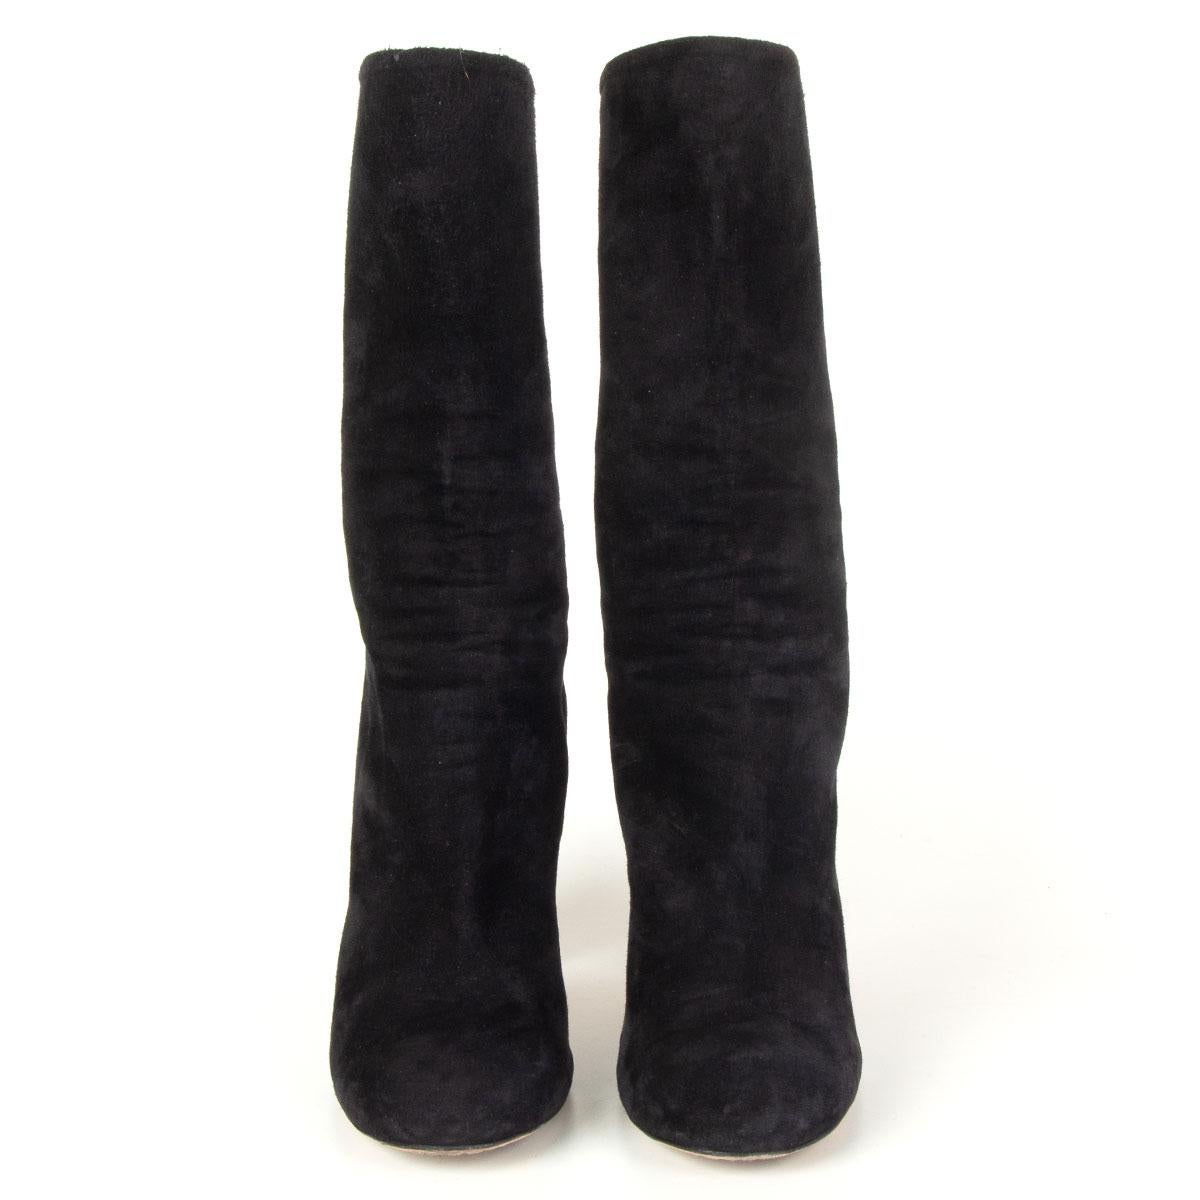 100% authentic Alexander McQueen round-toe mid-calf boots in black soft suede with a metallic silver heel that's spliced with gold. Zip fastening along back. Have been worn and are in excellent condition. 

Measurements
Imprinted Size	37.5
Shoe